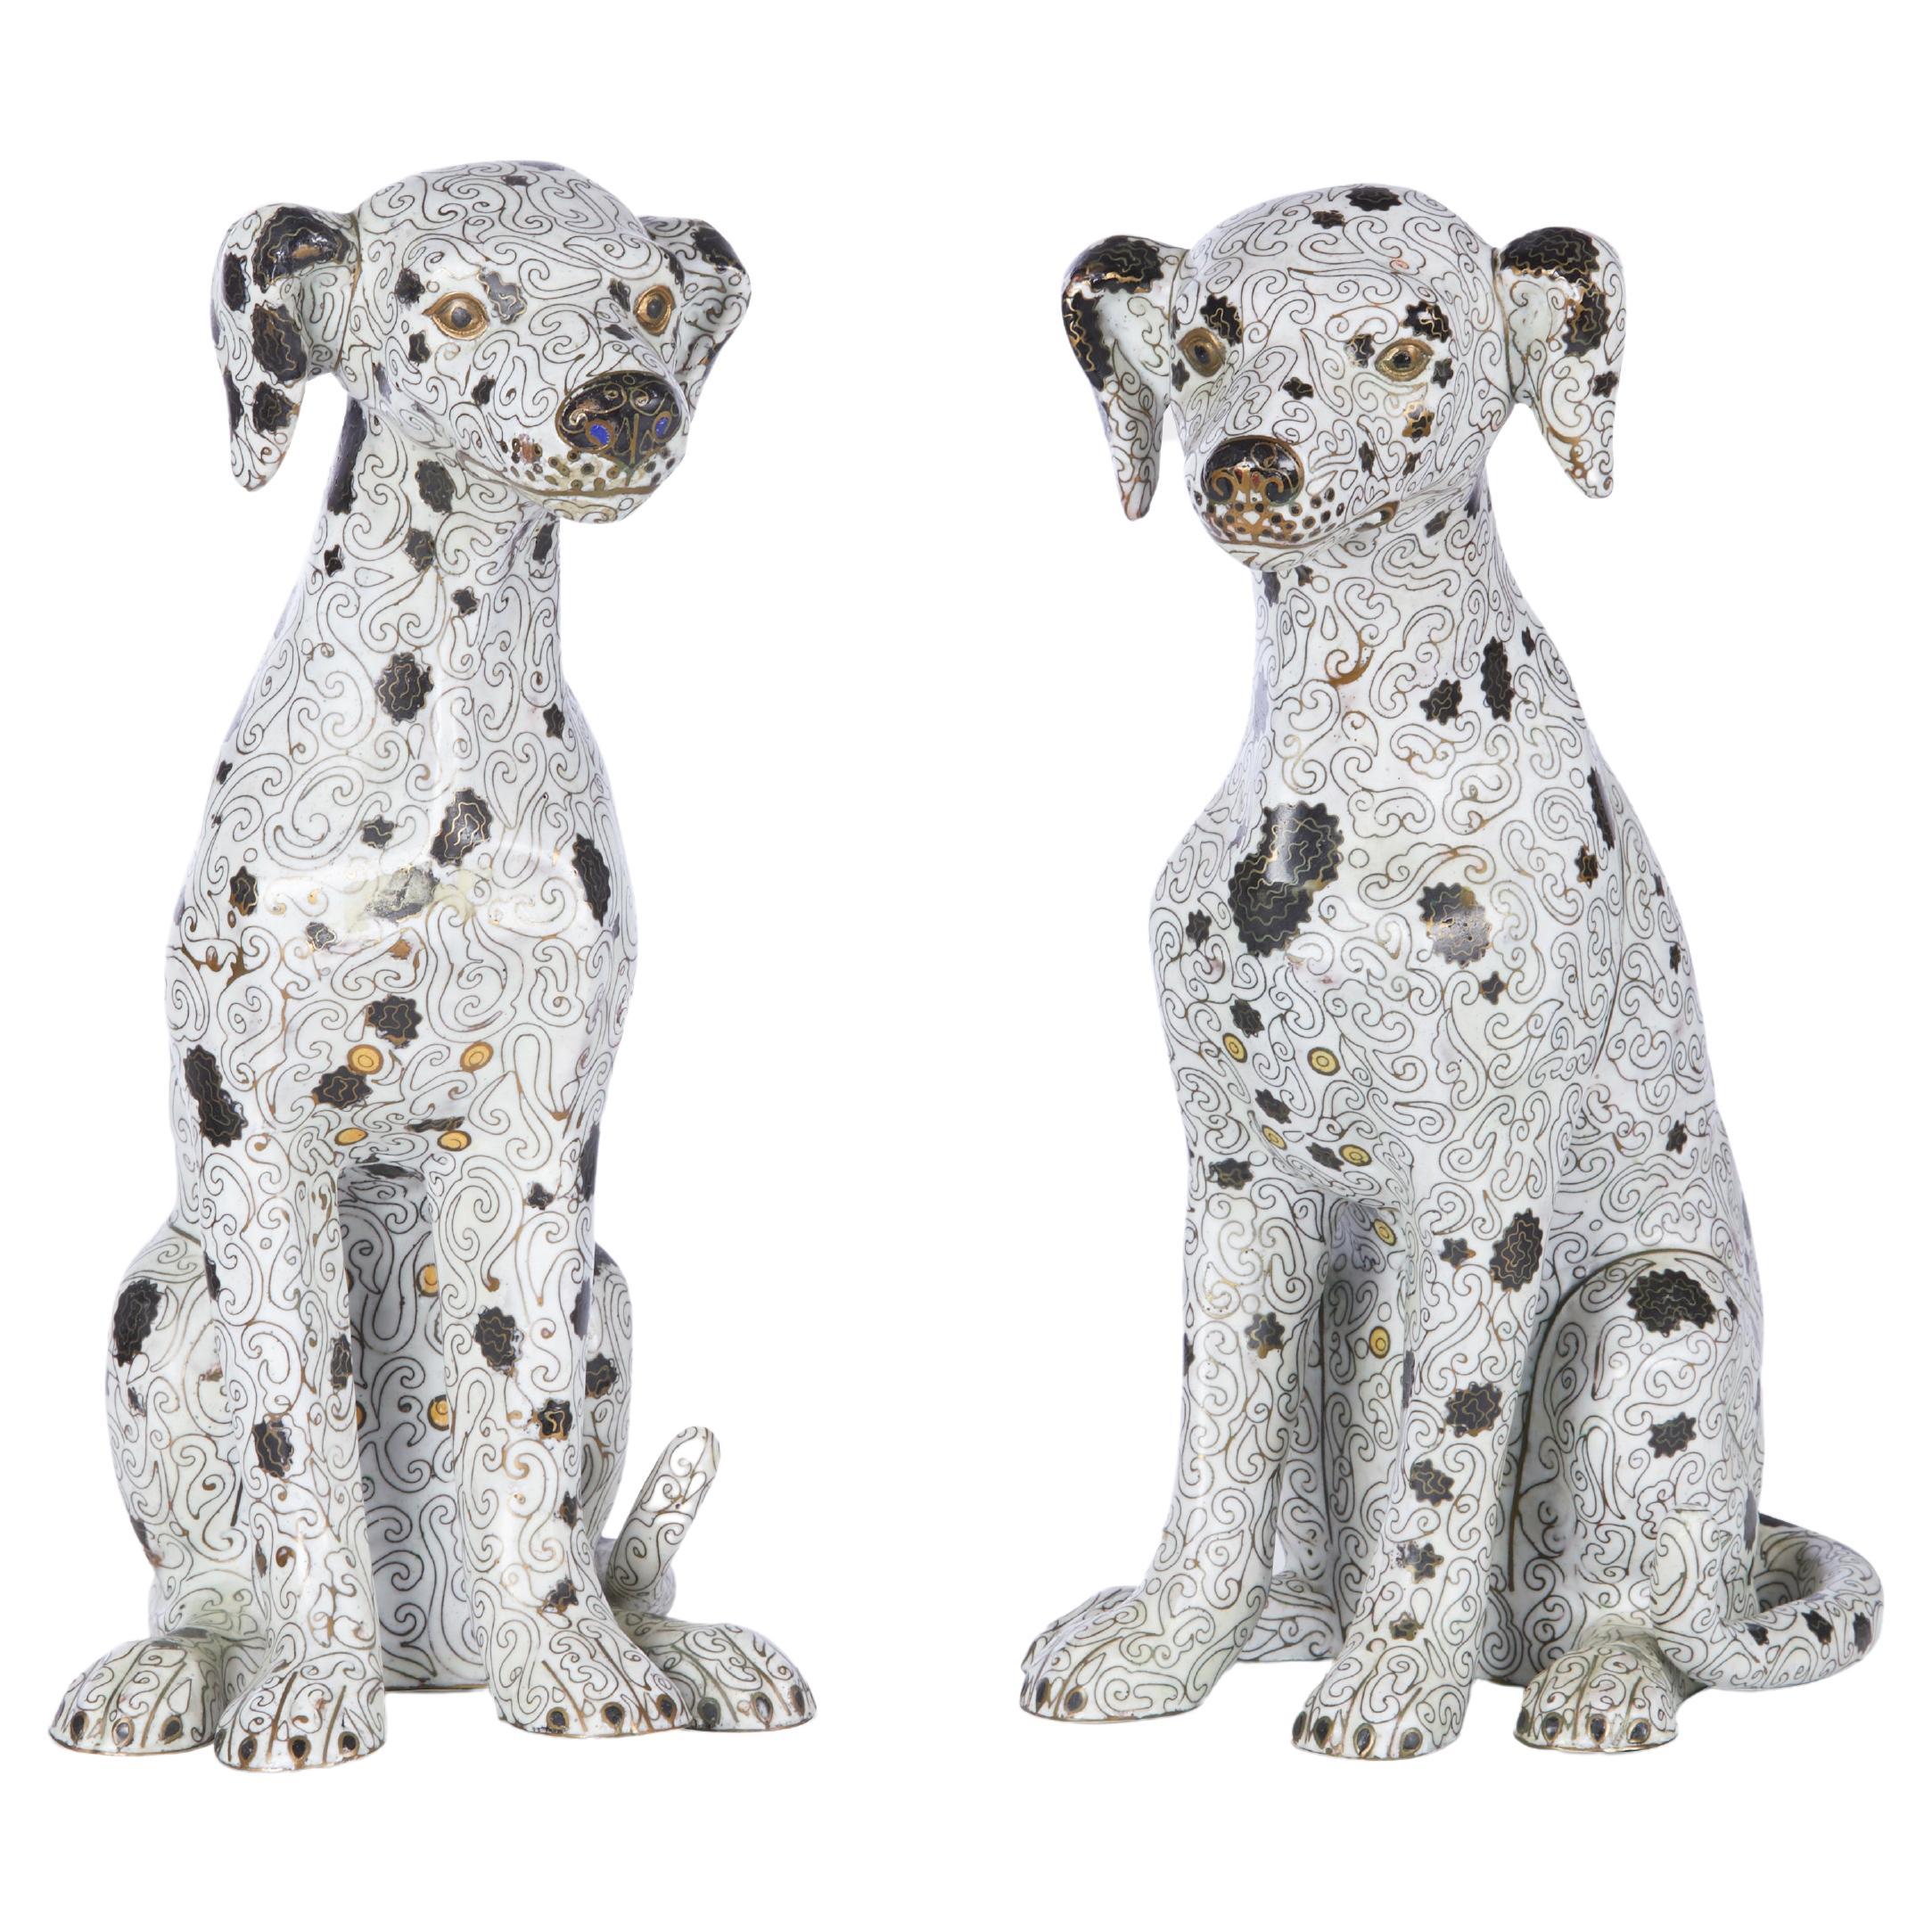 Pair of Chinese Cloisonné Dog Sculptures